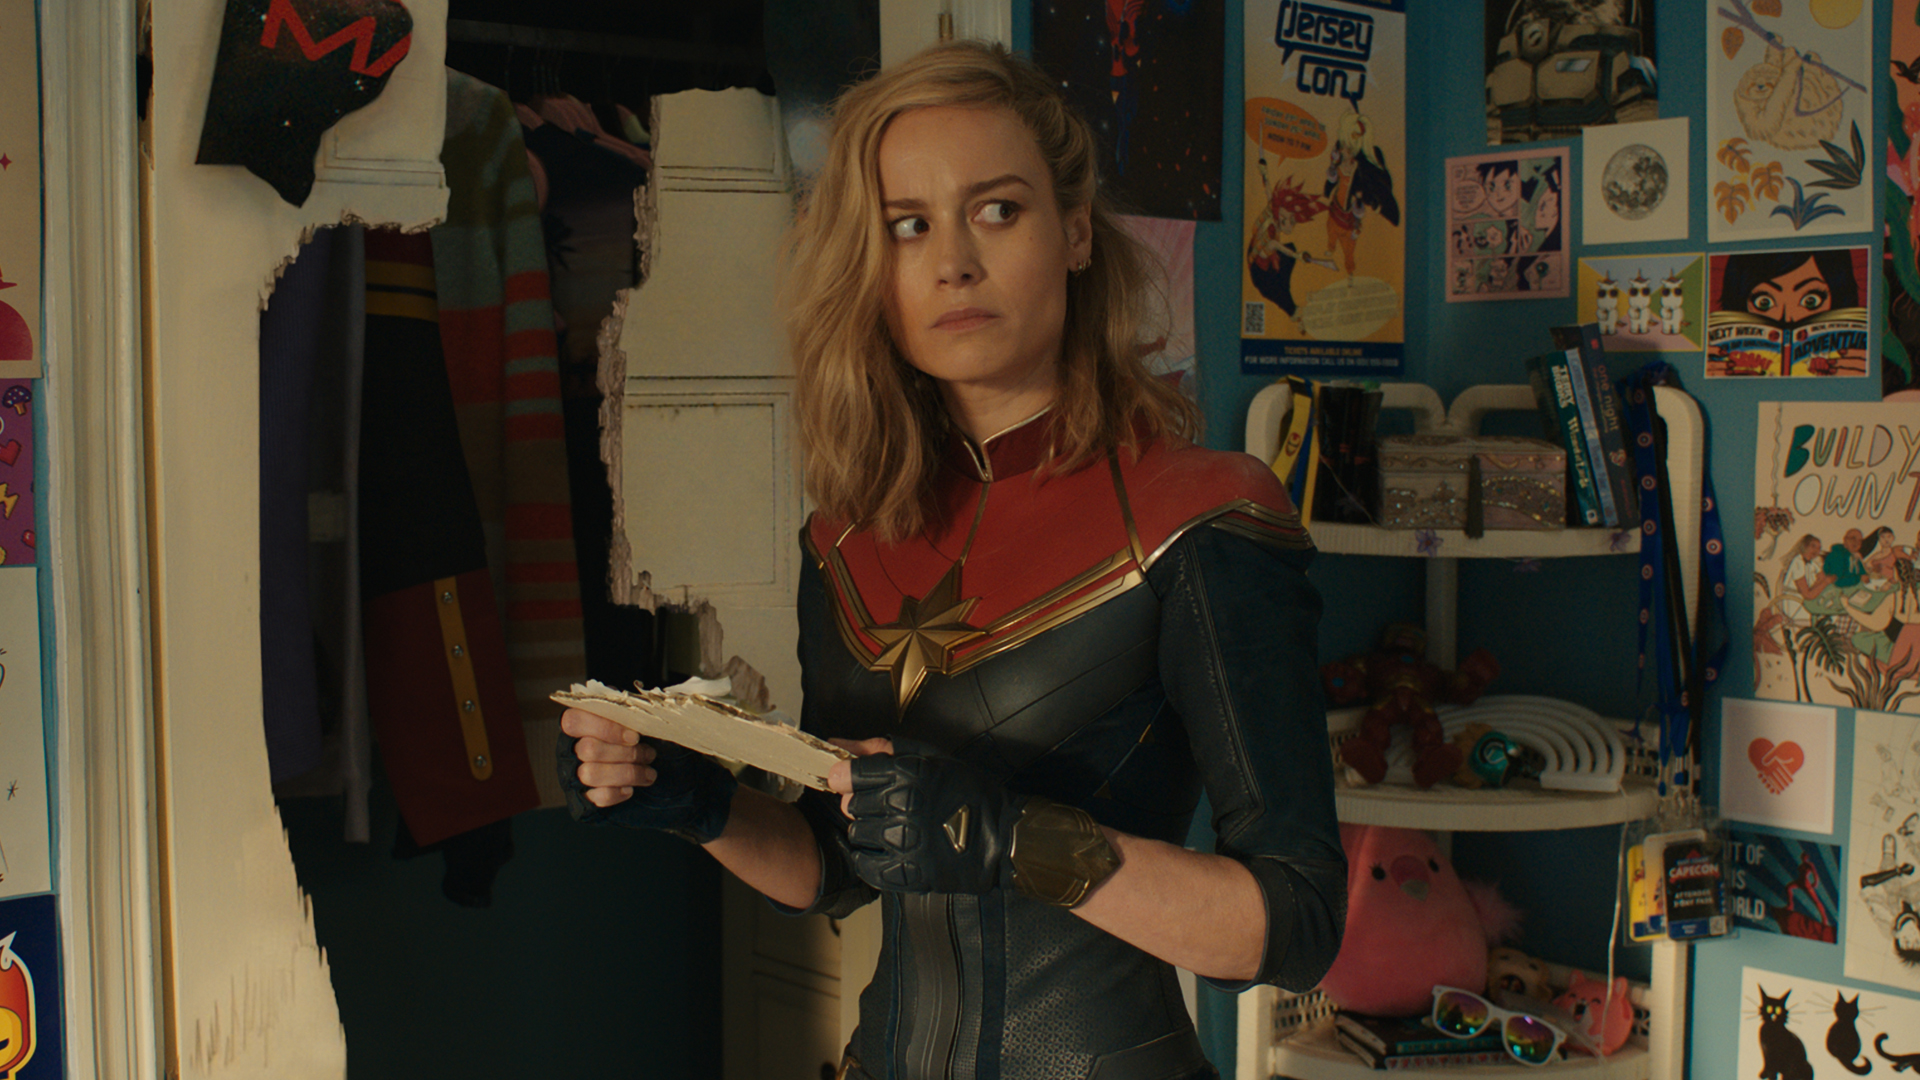 Captain Marvel looks puzzled as she stands in Kamala Khan's room in The Marvels